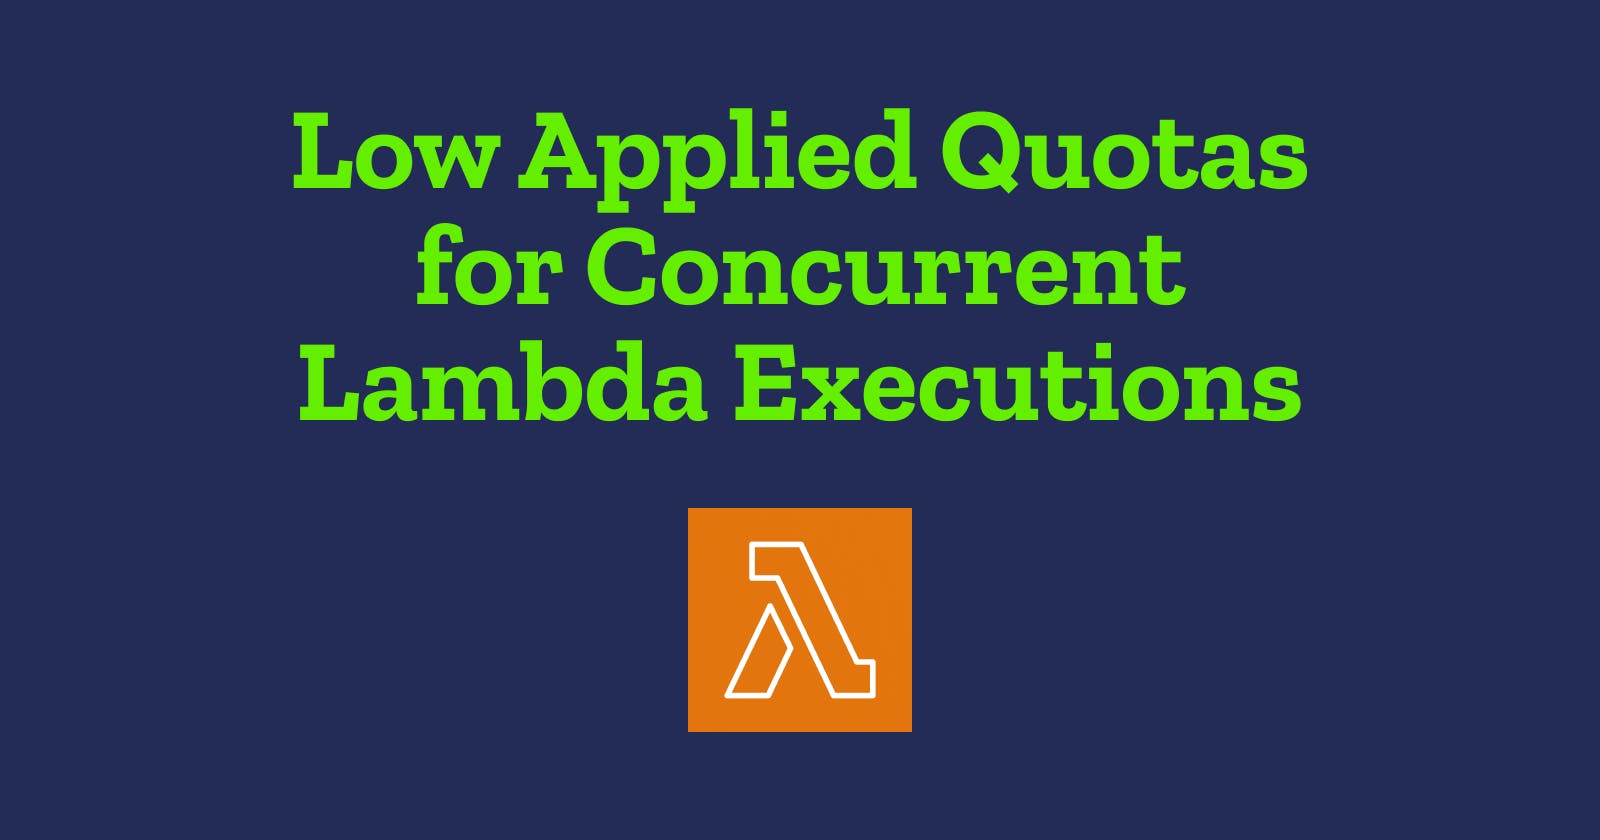 My Lambda concurrency applied quota is only 10? But why???